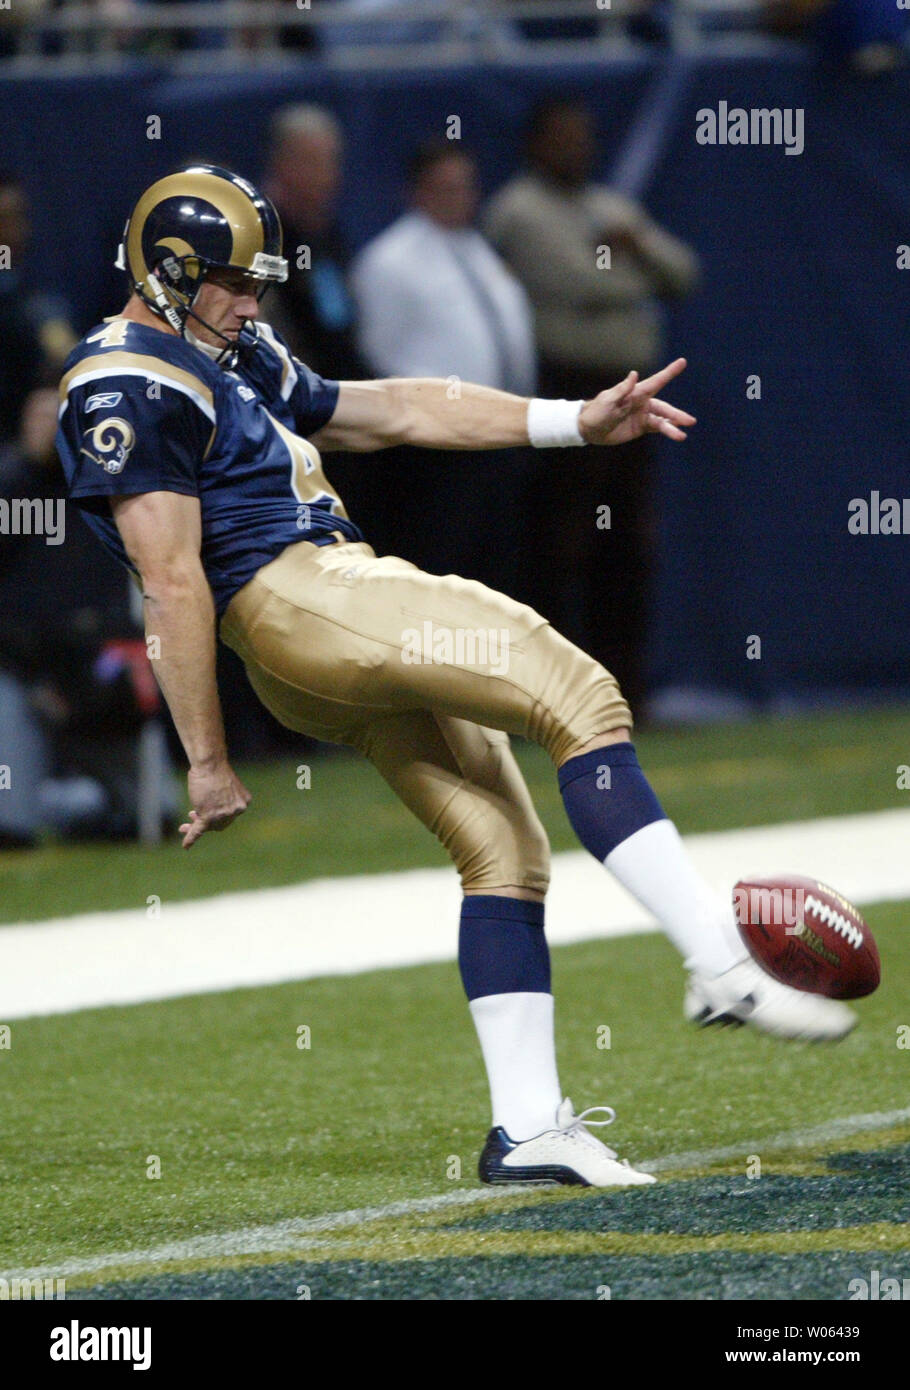 St. Louis Rams punter Bryan Barker appears to have stepped out of the endzone as he punts in the first quarter against the Washington Redskins at the Edward Jones Dome in St. Louis on December 4, 2005. The infraction went unnoticed in the 47 yard punt. (UPI Photo/Bill Greenblatt) Stock Photo